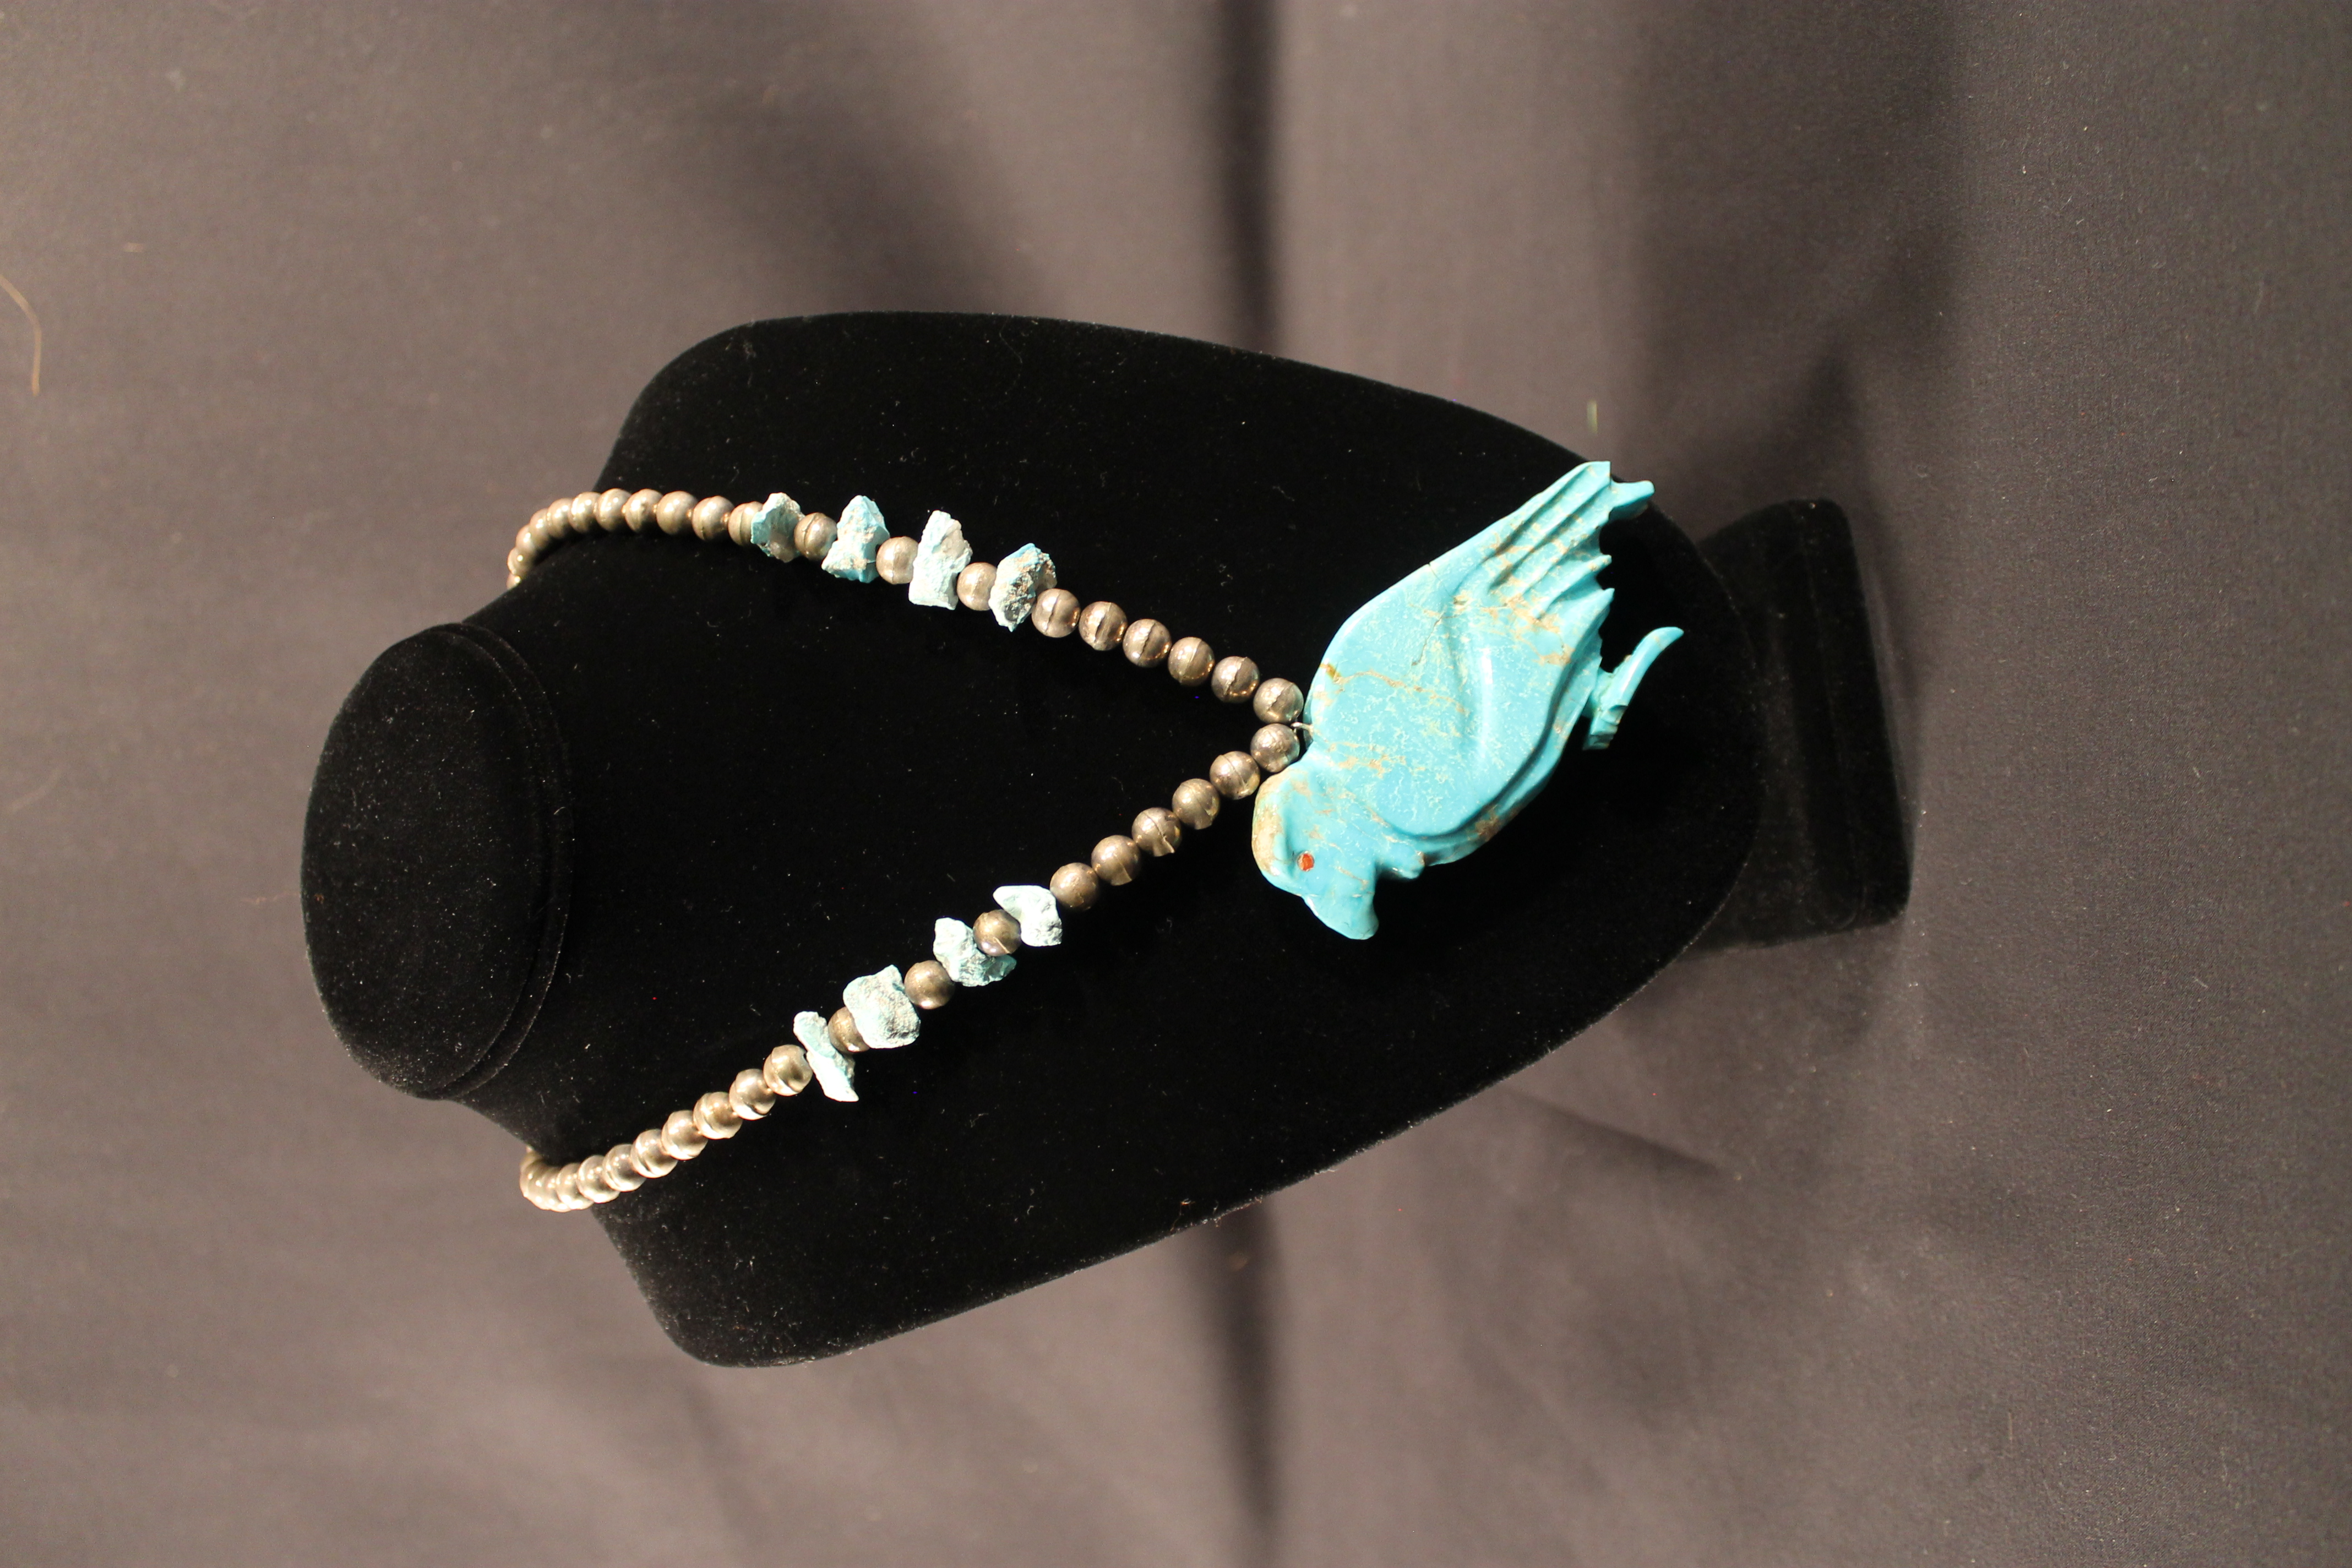 urquoise bird necklace that is comprised of brass-colored beads. At the bottom is a turquoise eagle pendant, which has a visible seam from being repaired